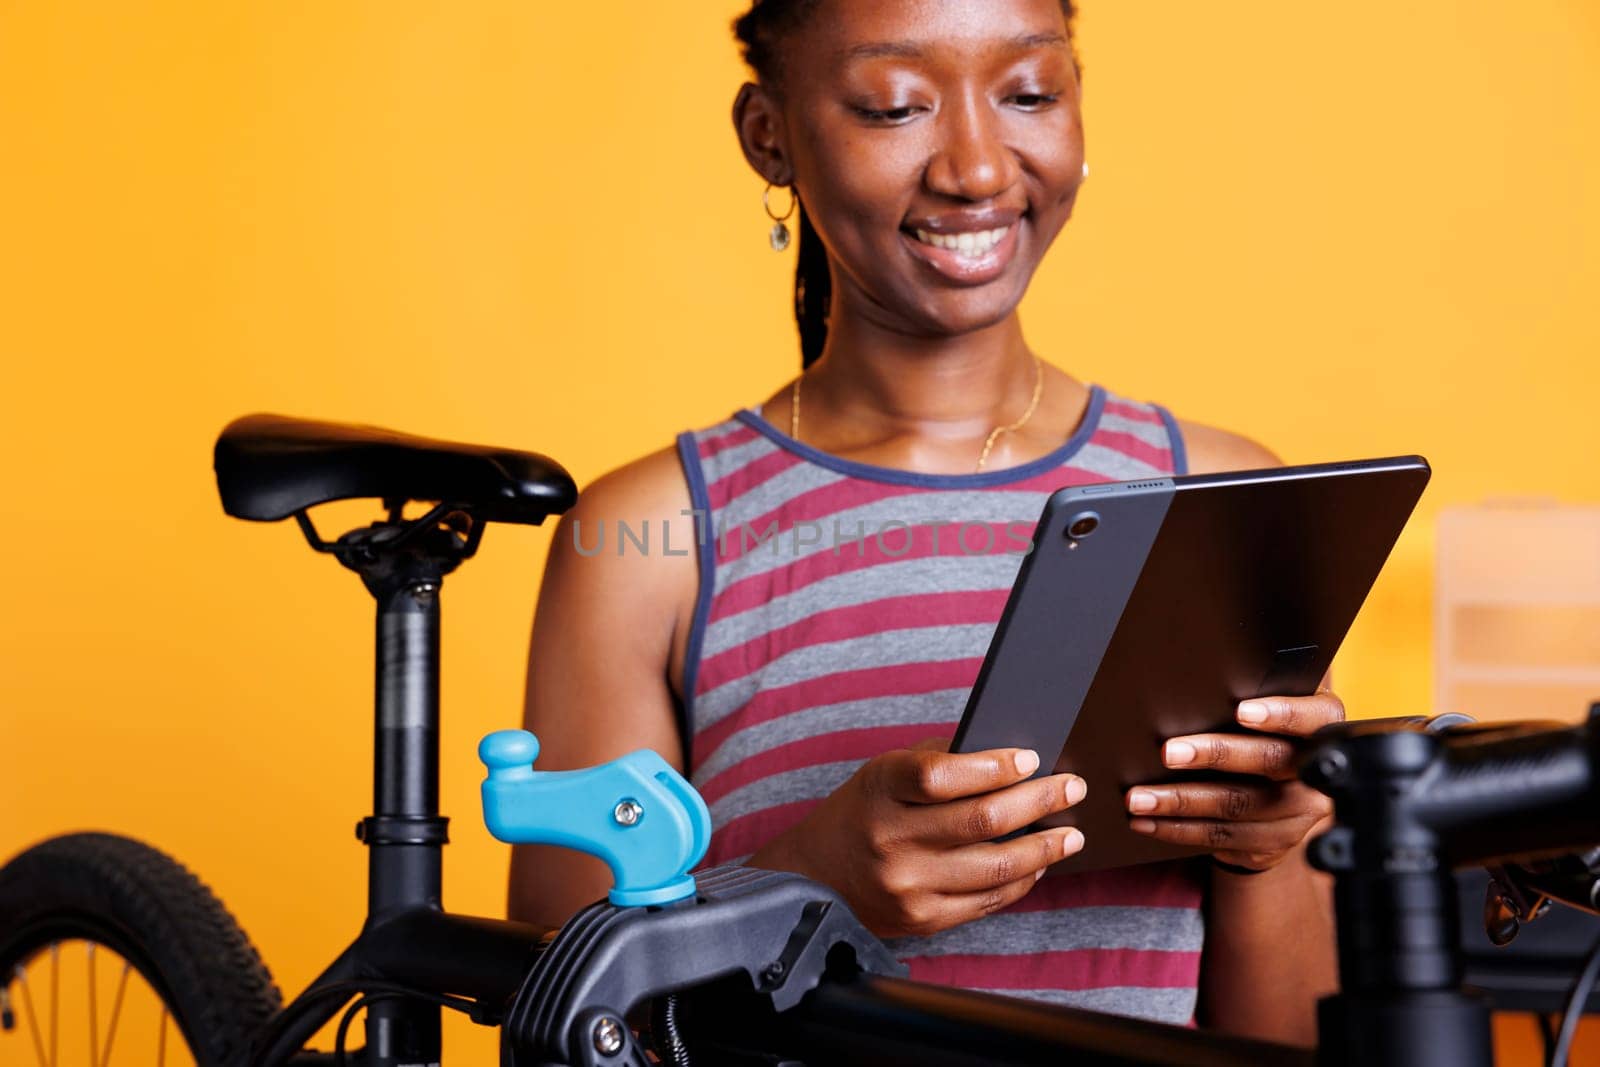 Energetic black woman carefully inspects and repairs bike frame using repair-stand and digital device. Image showing close-up view of female cyclist holding smart tablet while servicing bicycle.